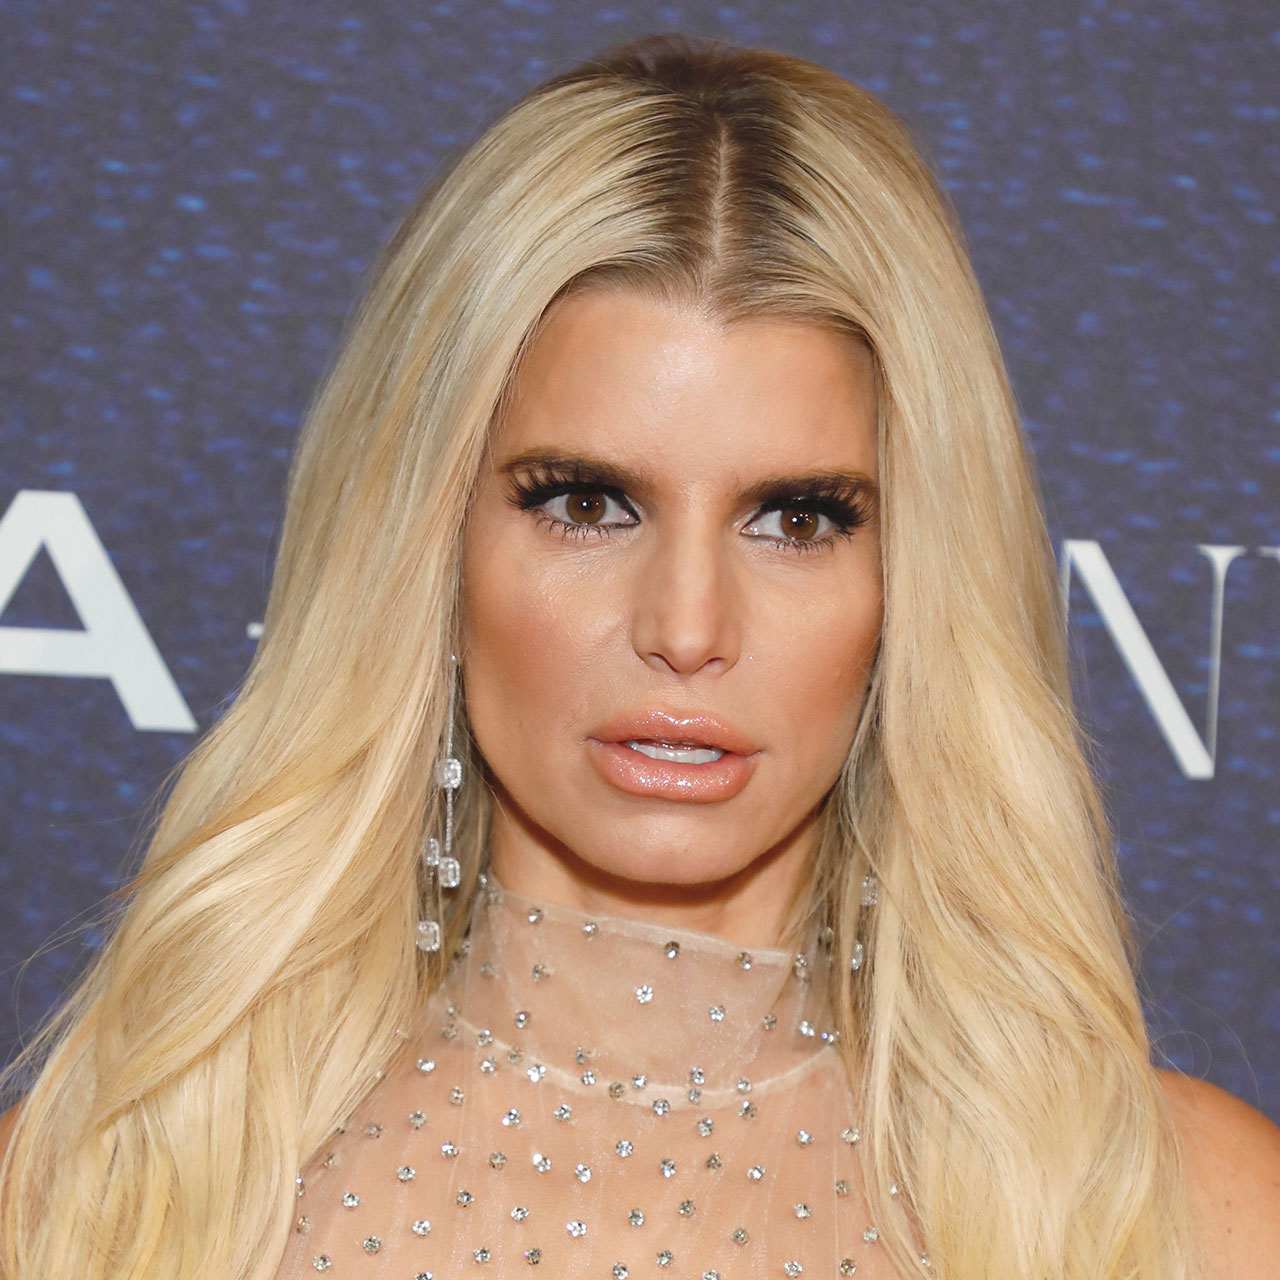 Jessica Simpson now: the star's life in 2023.